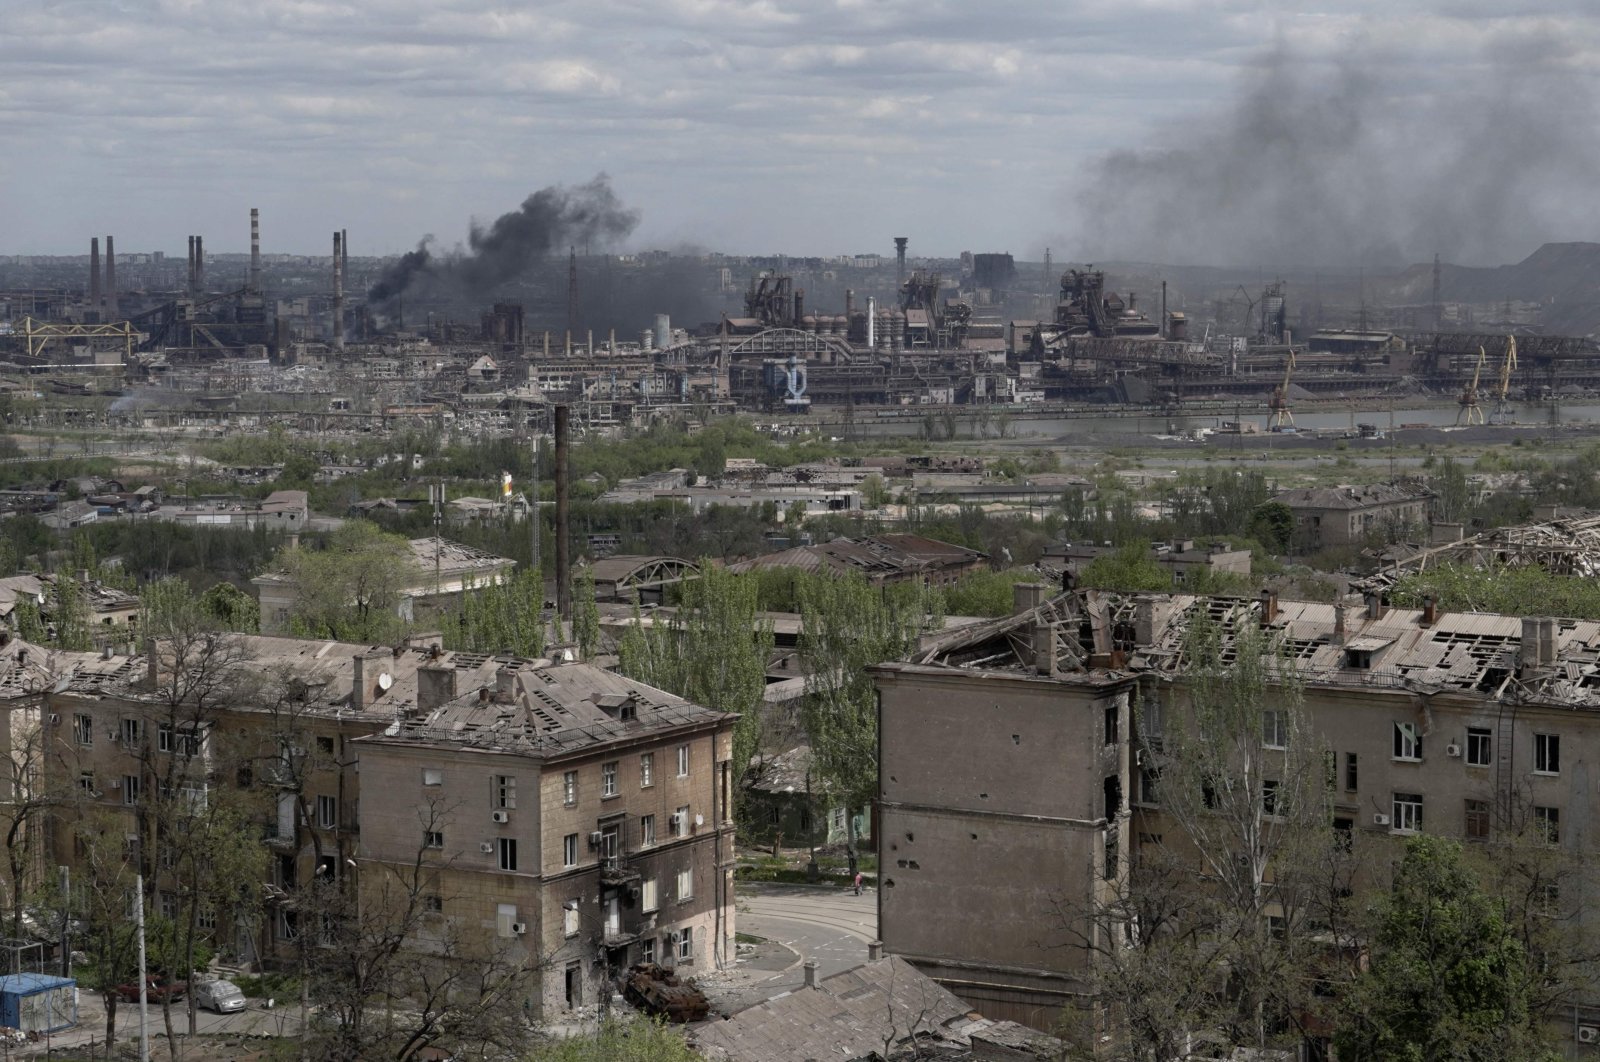 A view shows the city of Mariupol and the Azovstal steel plant on May 10, 2022, amid the ongoing Russian military action in Ukraine. (Photo by STRINGER / AFP)